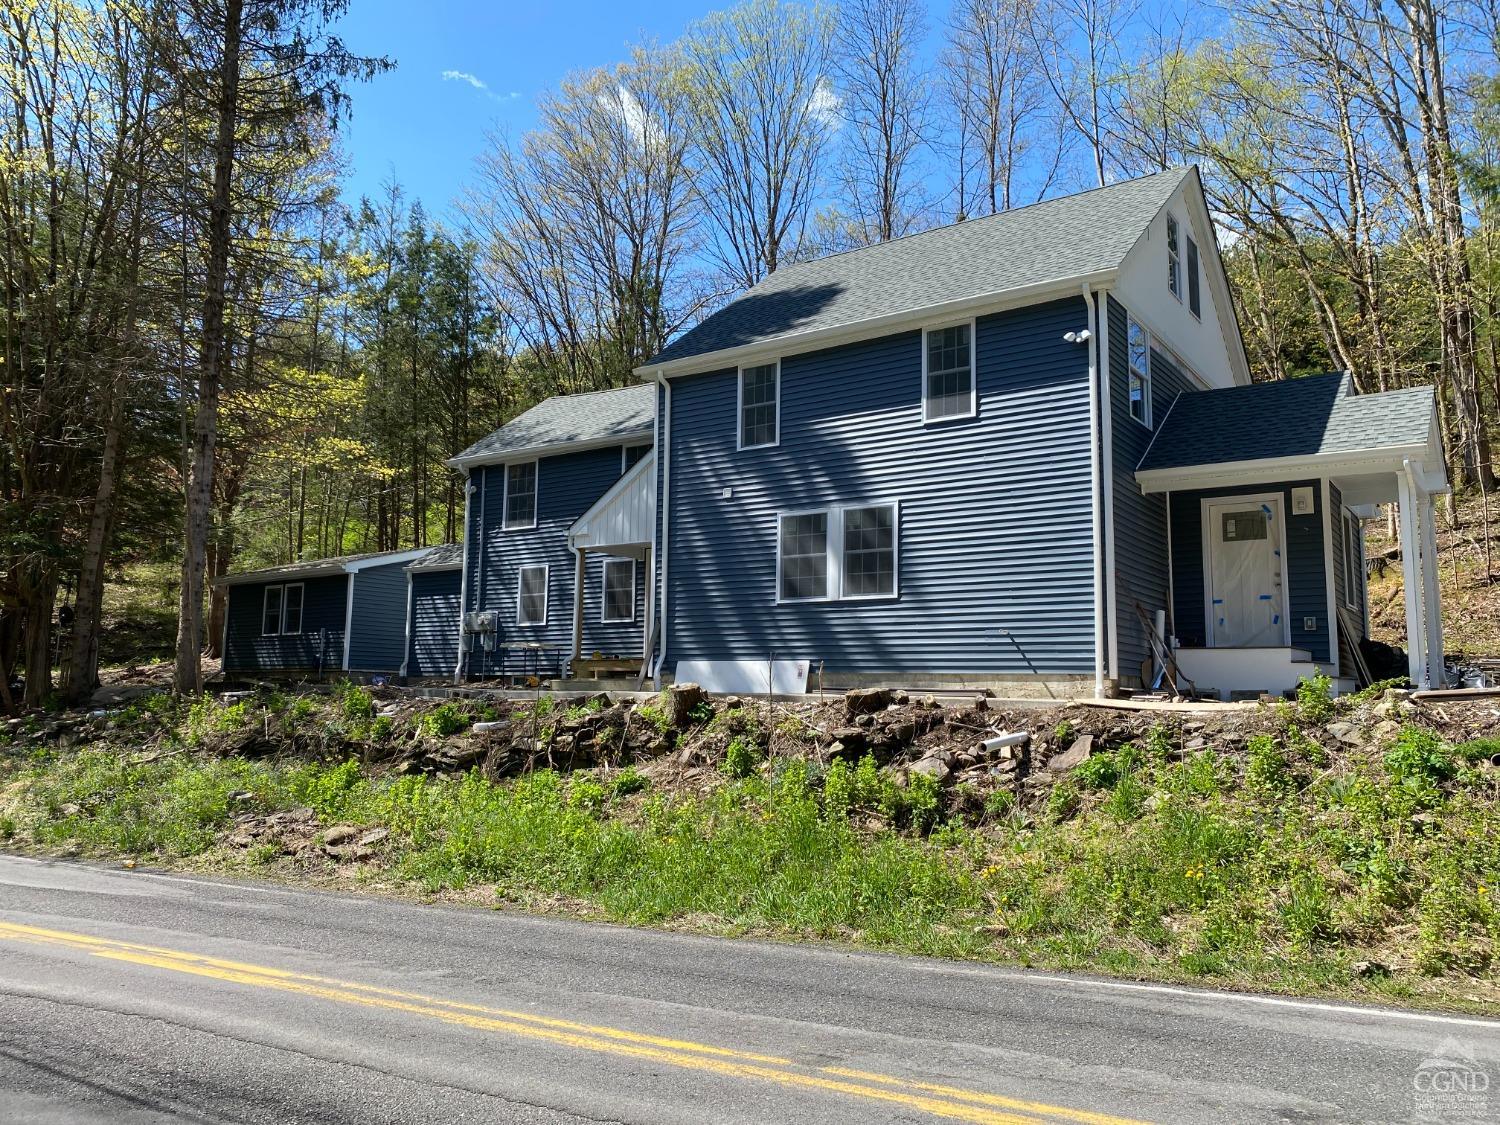 Rental Property at 1633 County Route 41, Greenville, New York - Bedrooms: 2 
Bathrooms: 2 
Rooms: 3  - $2,200 MO.